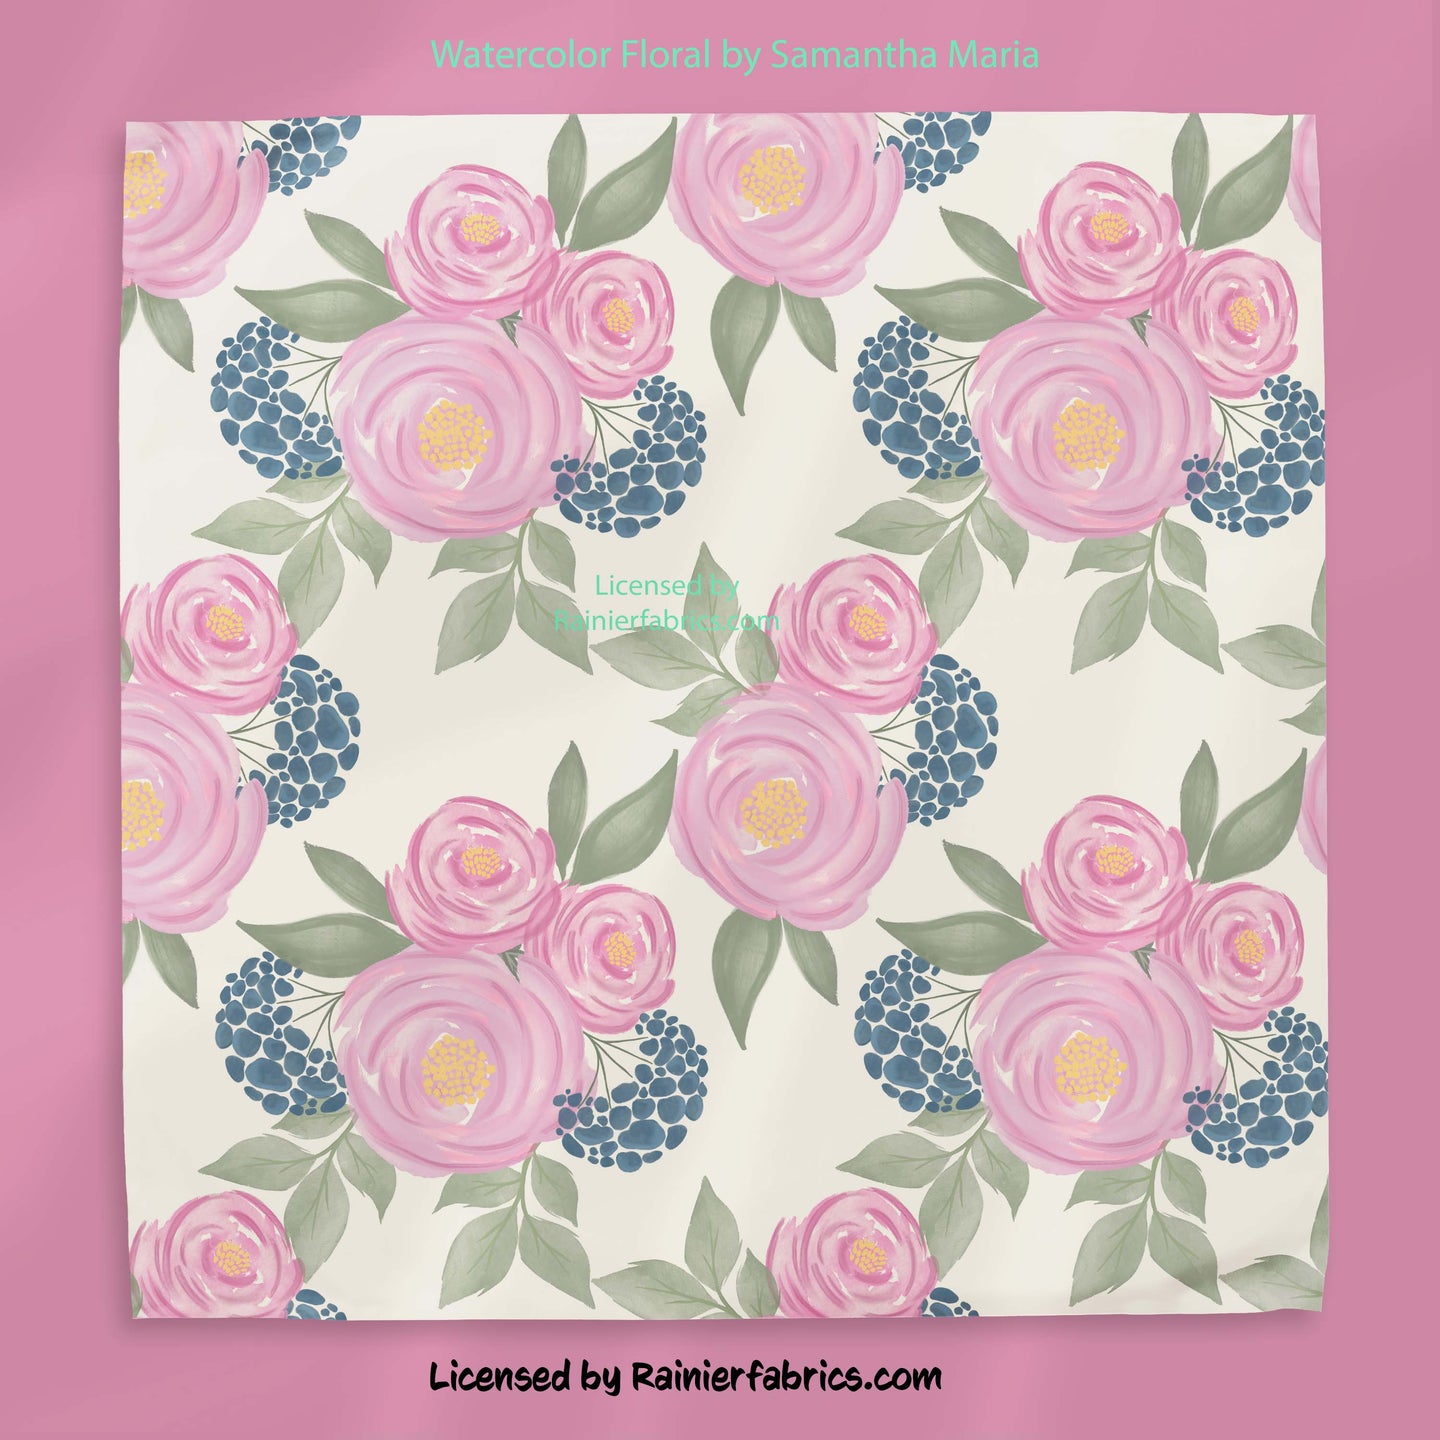 Watercolor Floral and Stripes from Samantha Marie - 2-5 business days to ship - Order by 1/2 yard